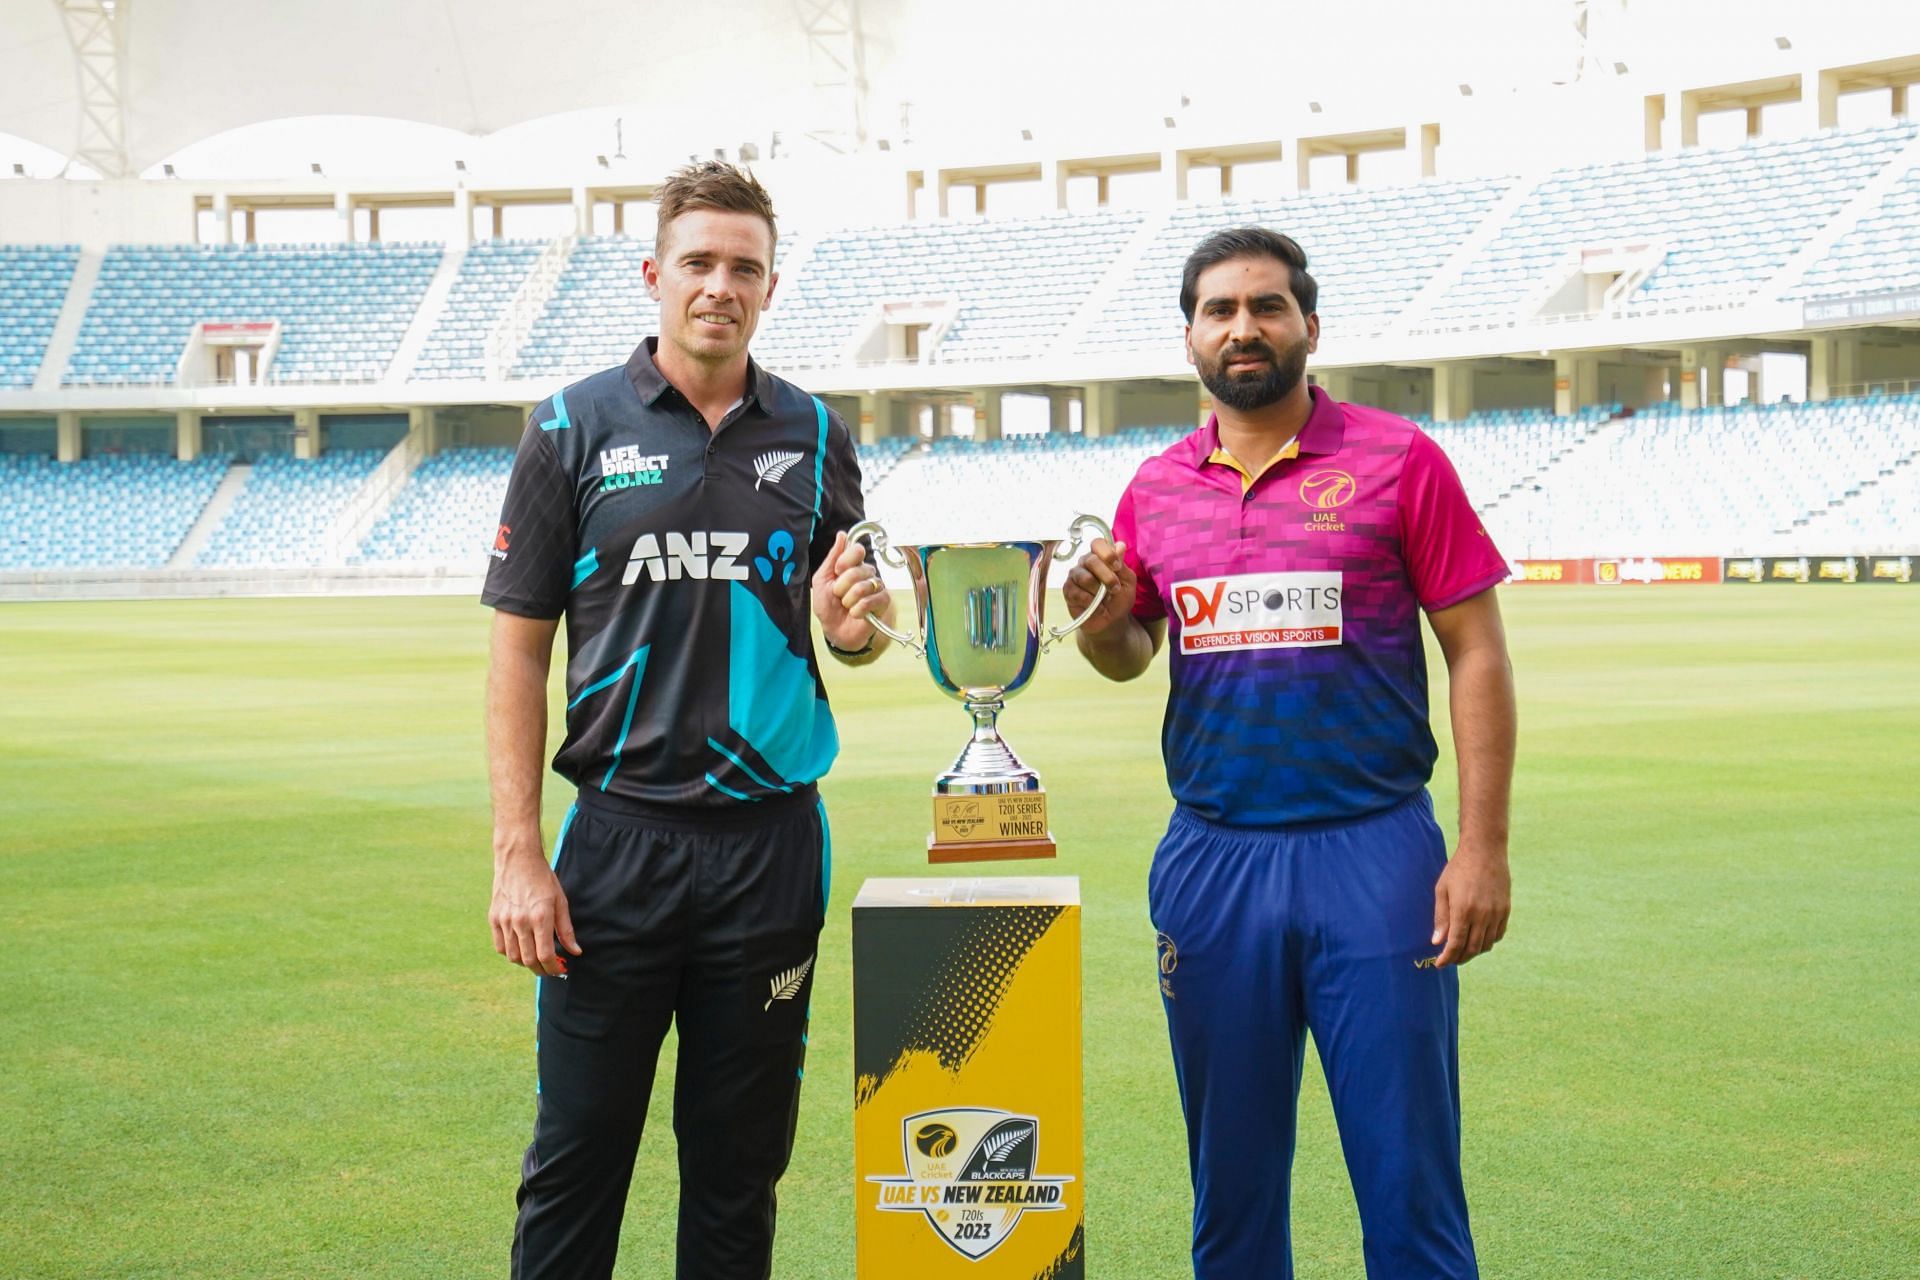 New Zealand captain Tim Southee with UAE skipper. (Credits: Twitter)